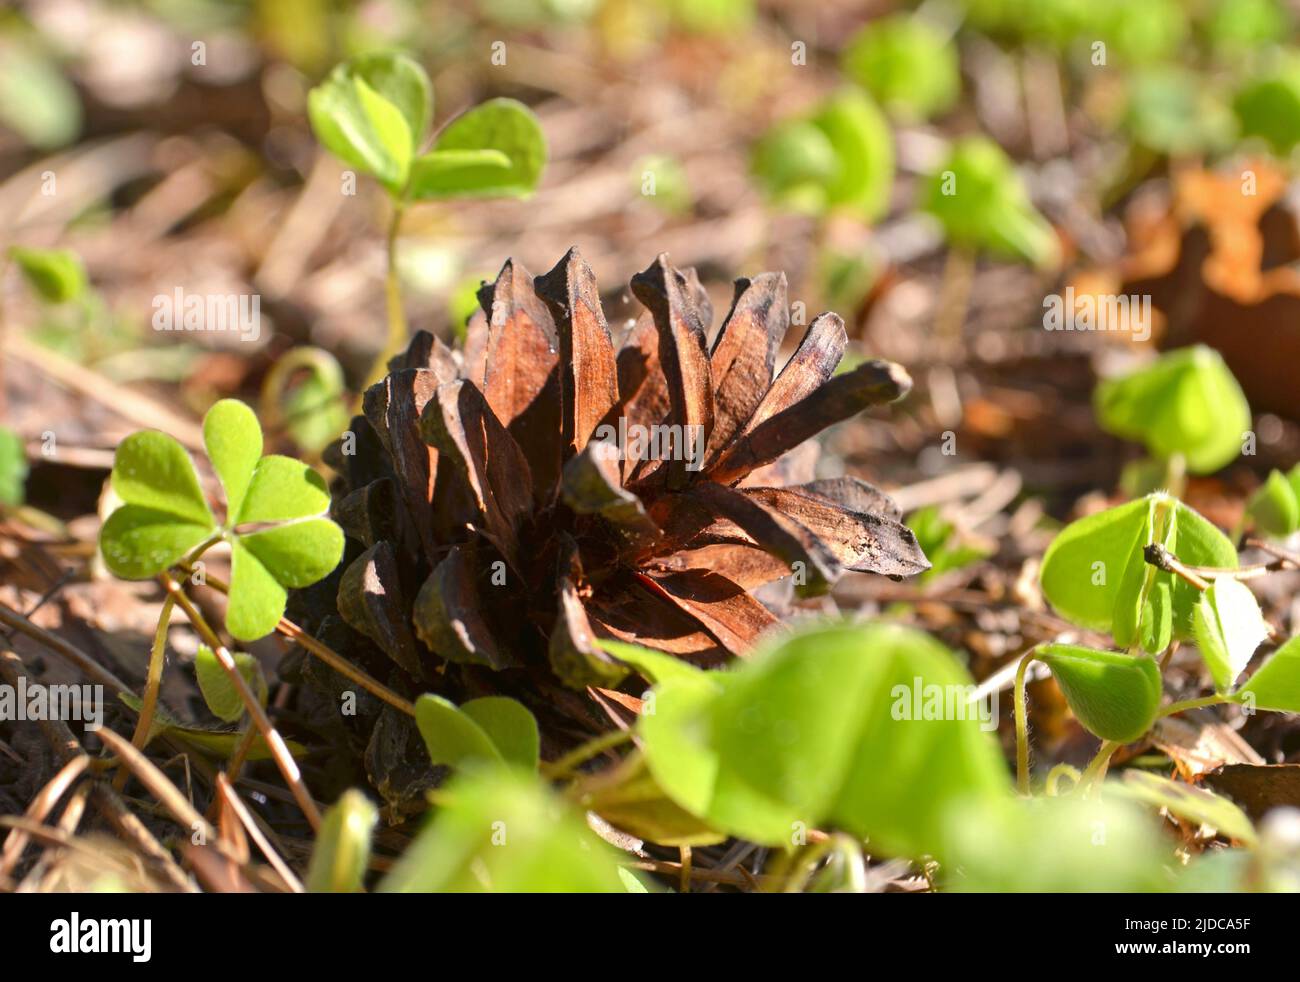 pine cone in a Pine Tree. Pinus. Isolated pine. Pine branch with cones isolated on light natural background Stock Photo